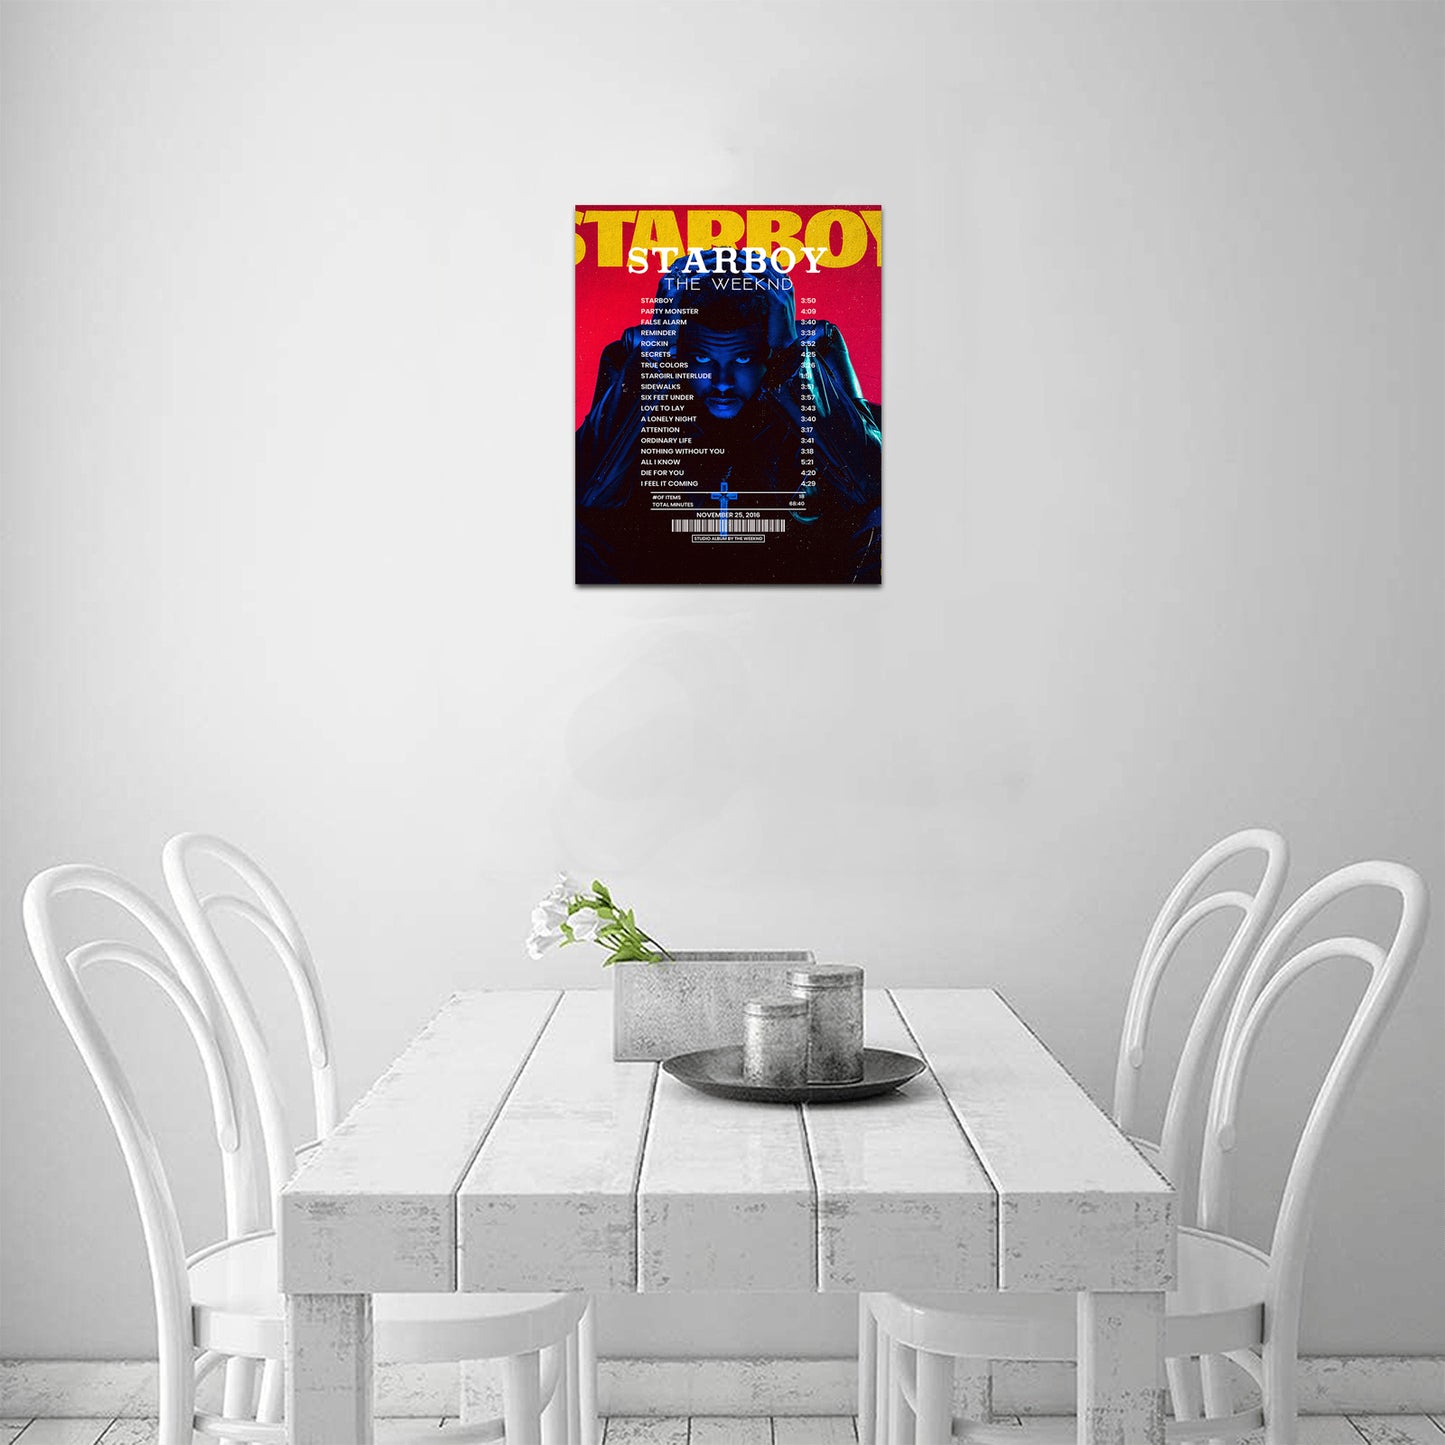 Starboy By The Weeknd [Canvas]